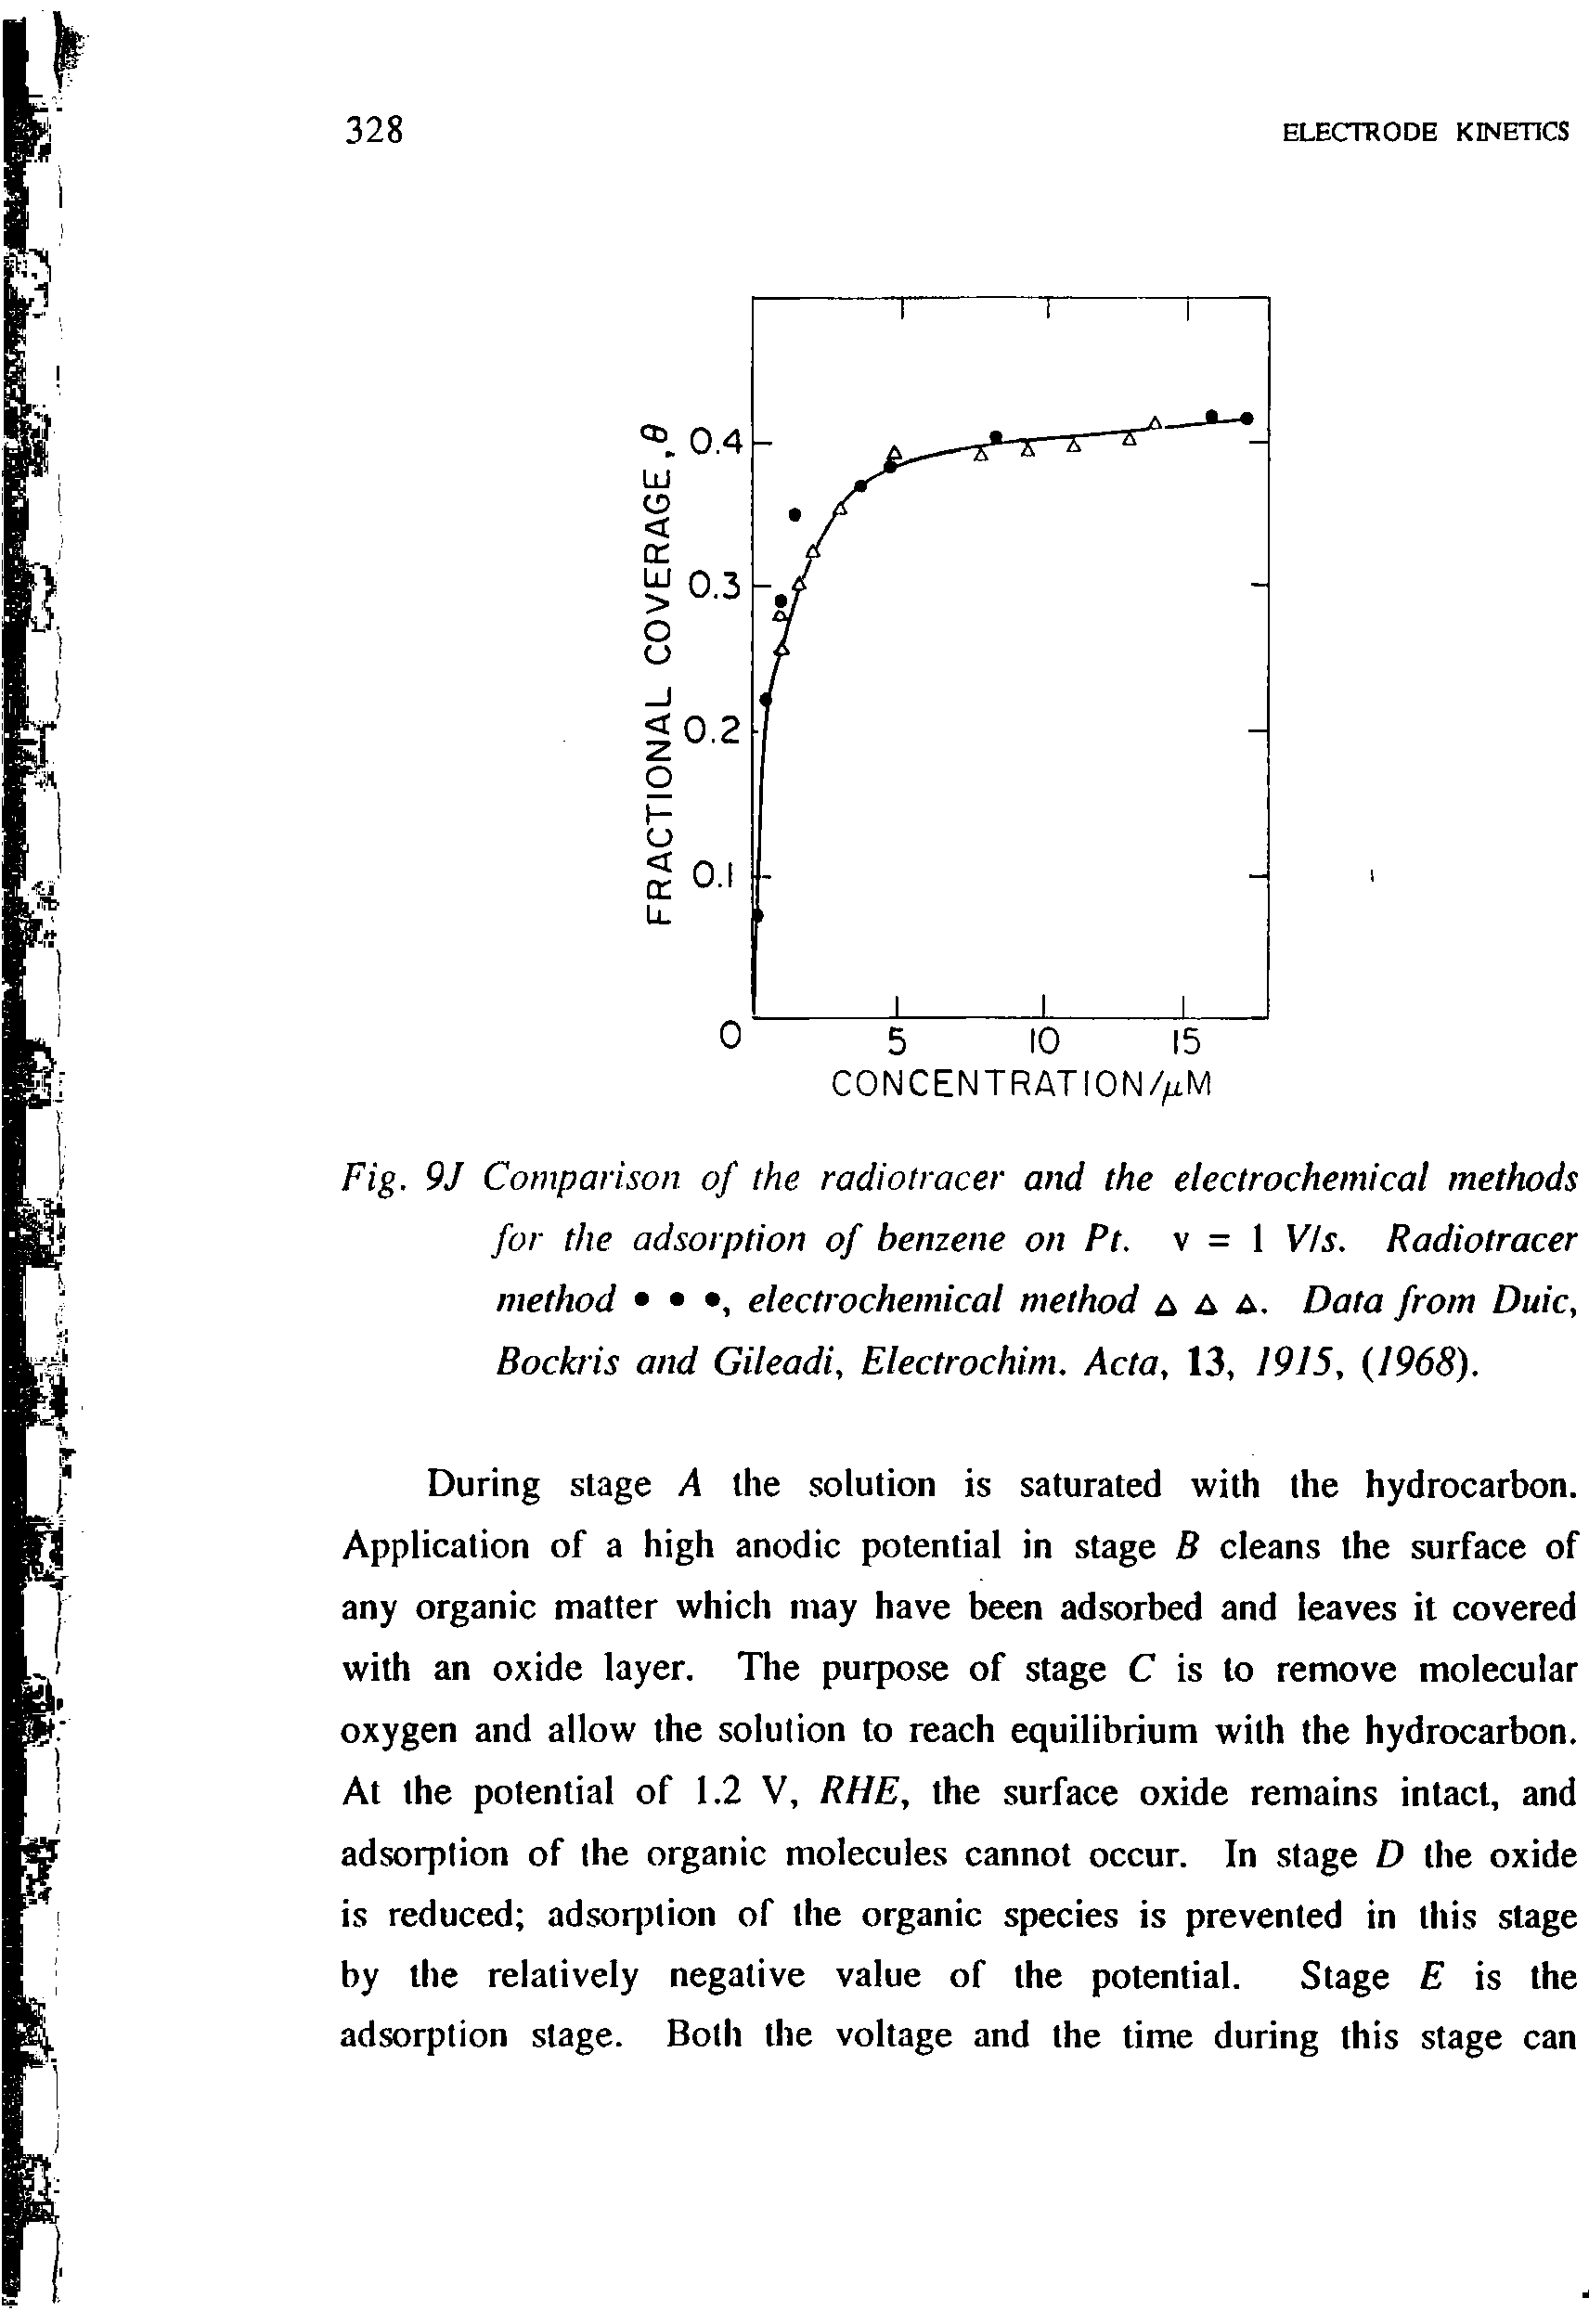 Fig. 9J Comparison of the radiotracer and the electrochemical methods for the adsorption of benzene on Pt. v = 1 Vis. Radiotracer method , electrochemical method a a A. Data from Duic, Bockris and Gileadi, Electrochim. Acta, 13, 1915, 1968).